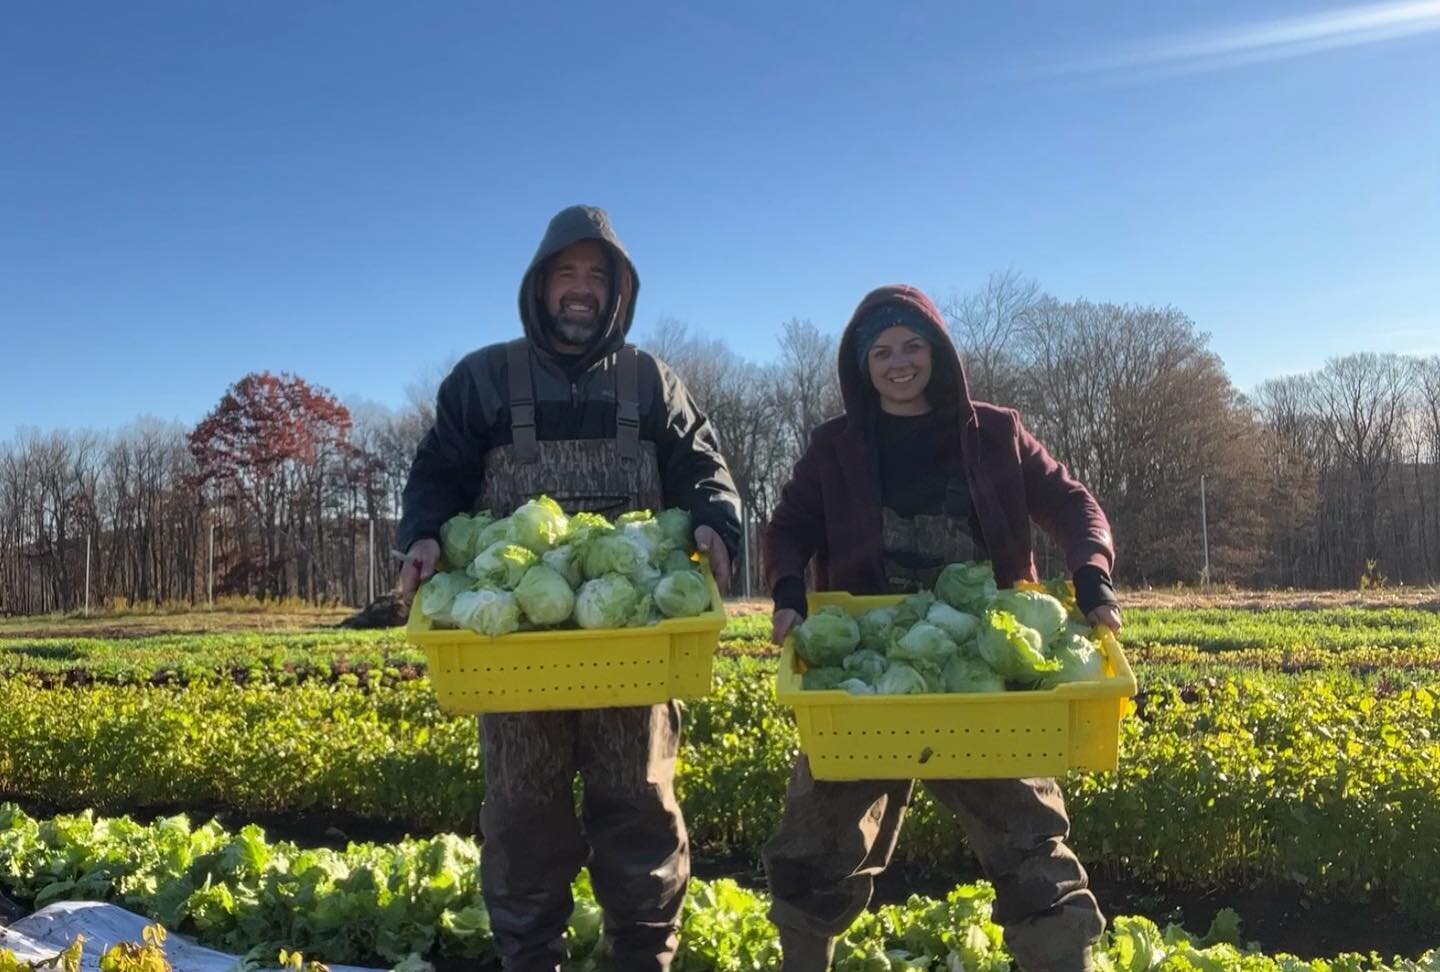 Happy Halloween morning! We&rsquo;re out here in the first frost of the season harvesting iceberg lettuce in the ice, in our stylish duck waders 🥬 🦆🥶

In other news, we&rsquo;re thrilled to have been selling our fresh vegetables to local schools (